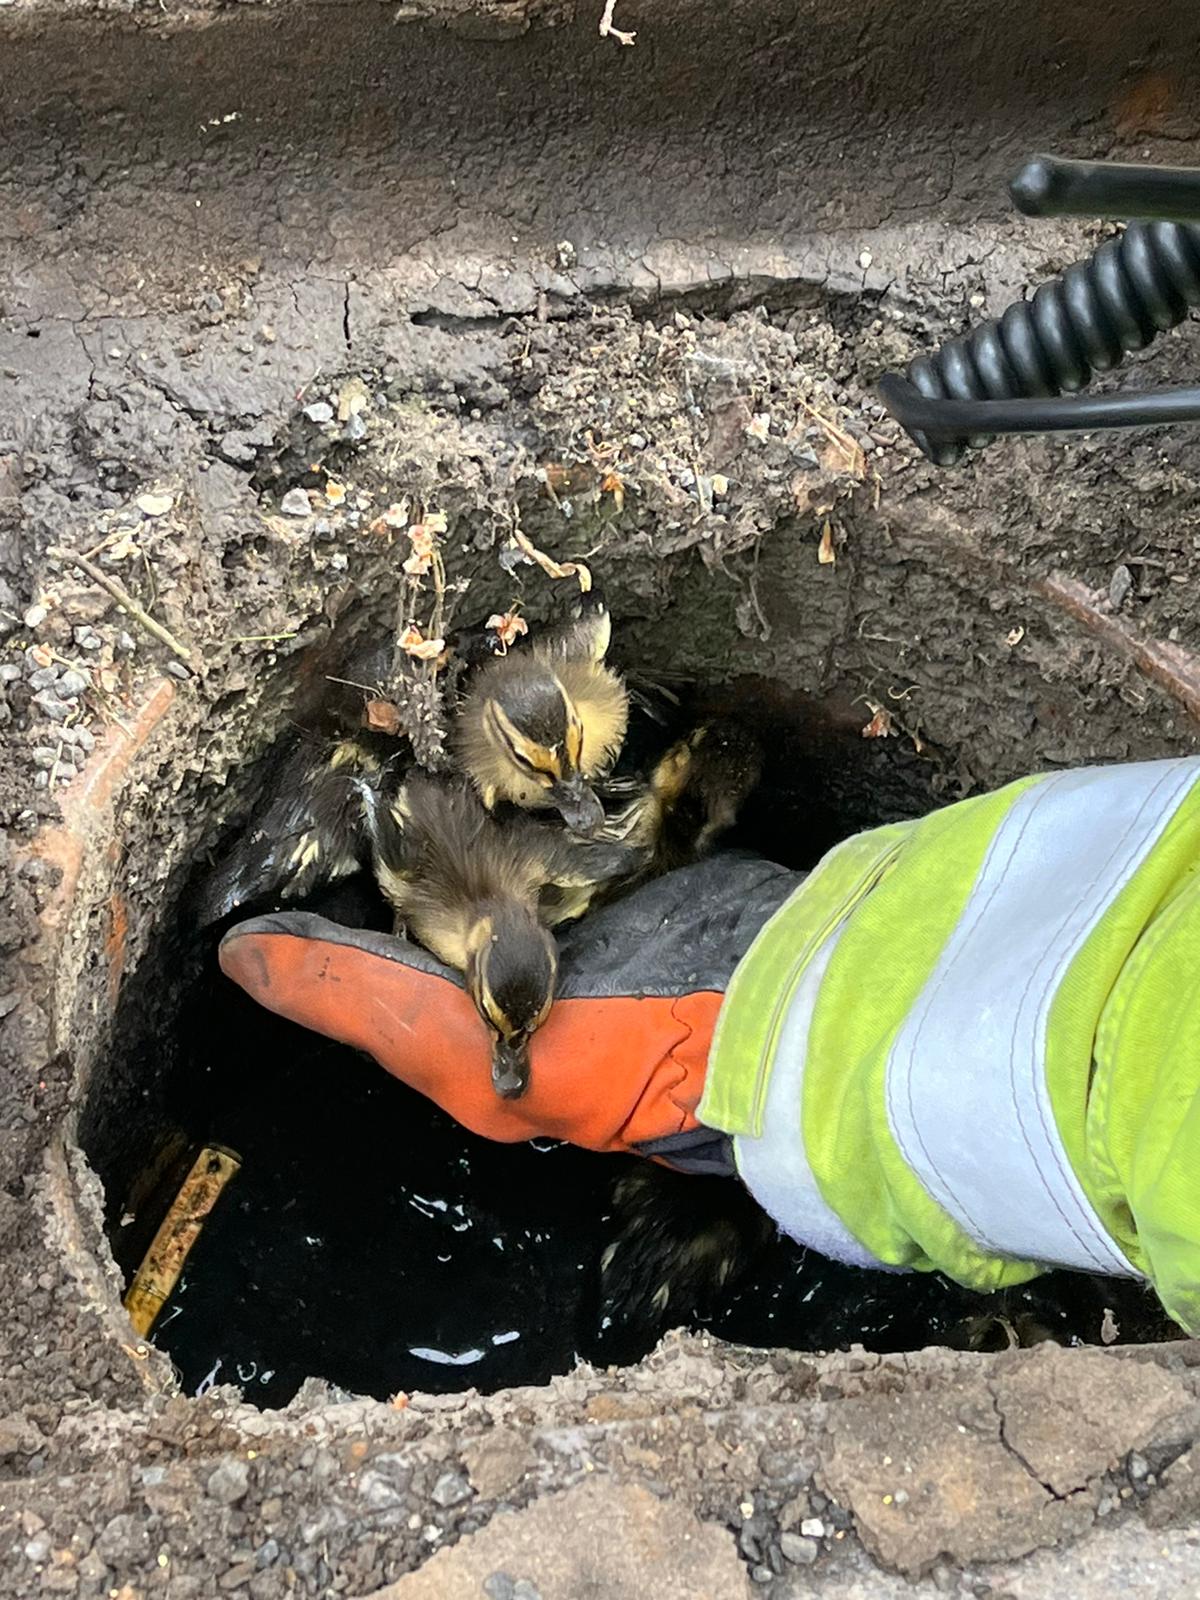 Firefighters rescued ducklings trapped down a drain (TWFRS/PA)